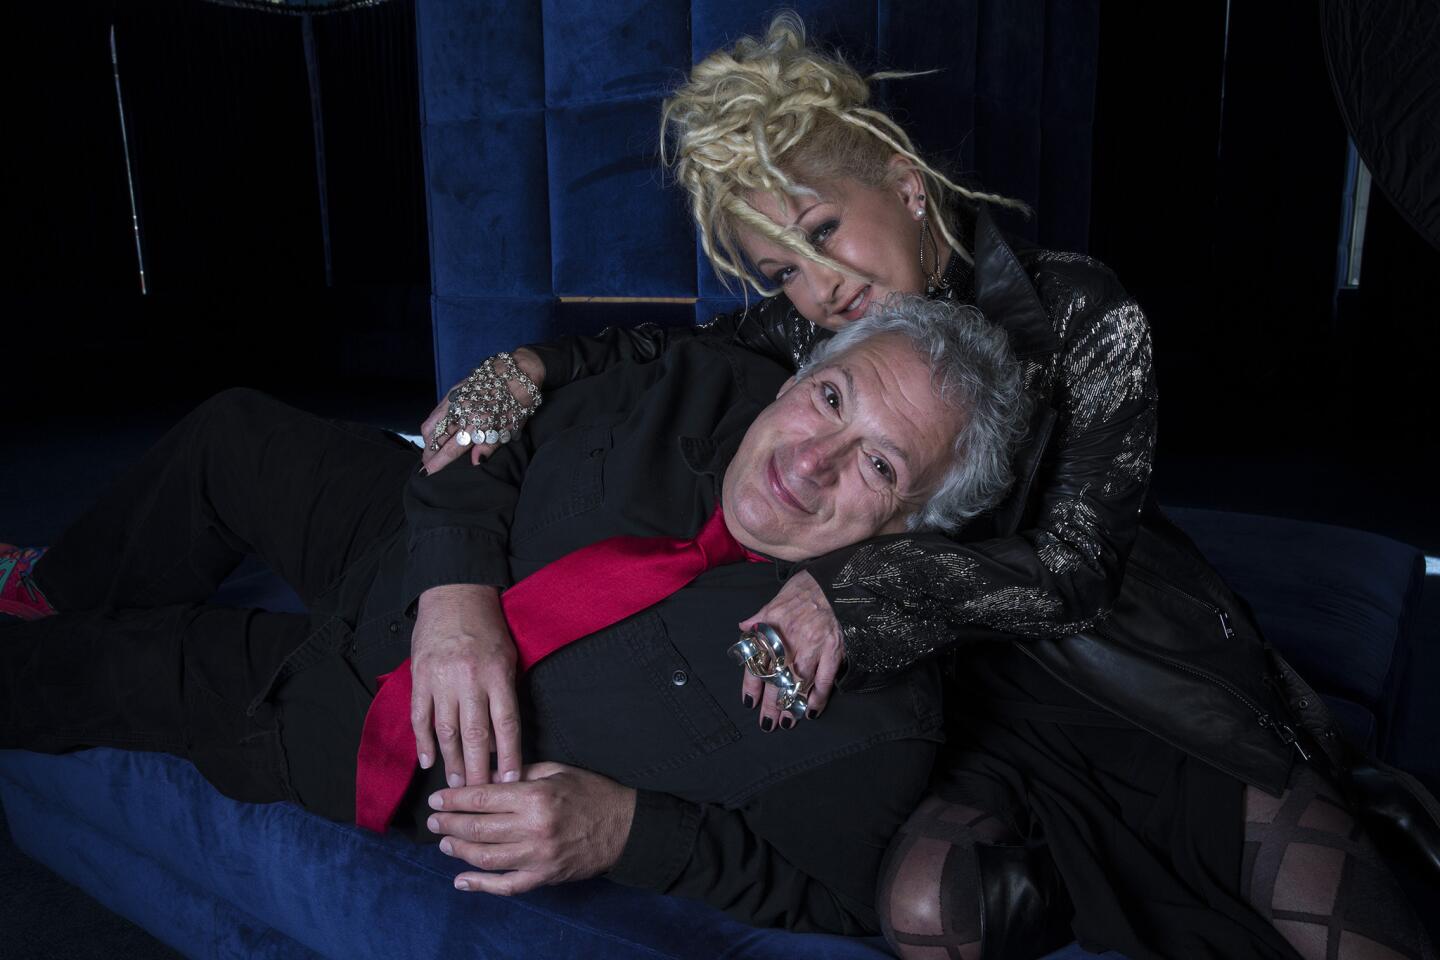 Arts and culture in pictures by The Times | Cyndi Lauper and Harvey Fierstein